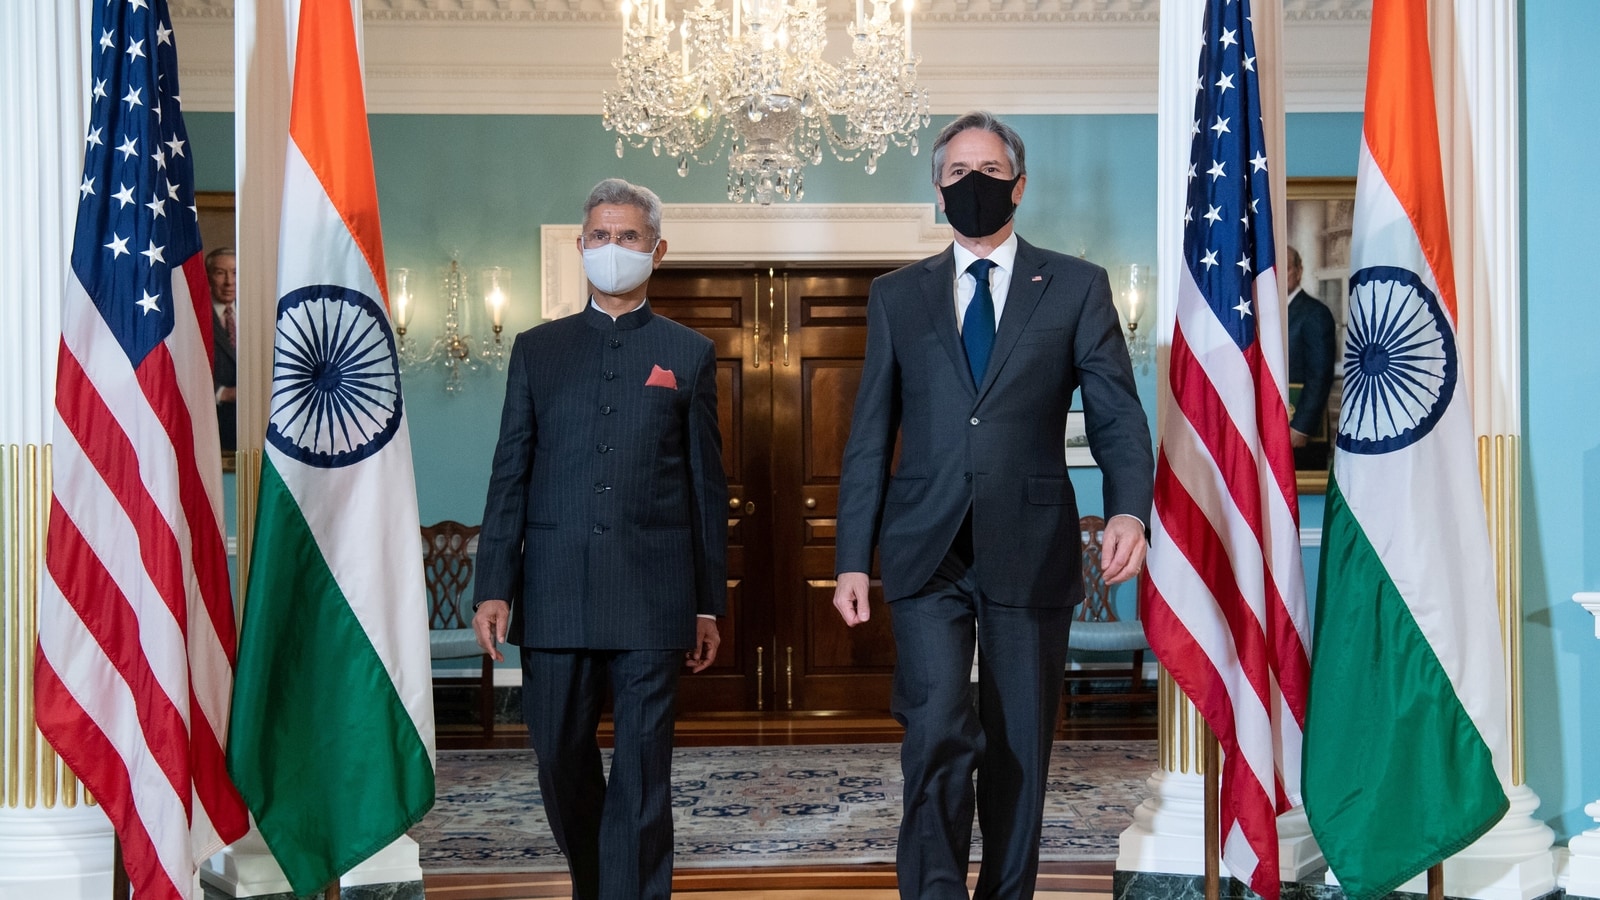 india, us to cement bilateral ties with quad after jaishankar visit | latest news india - hindustan times